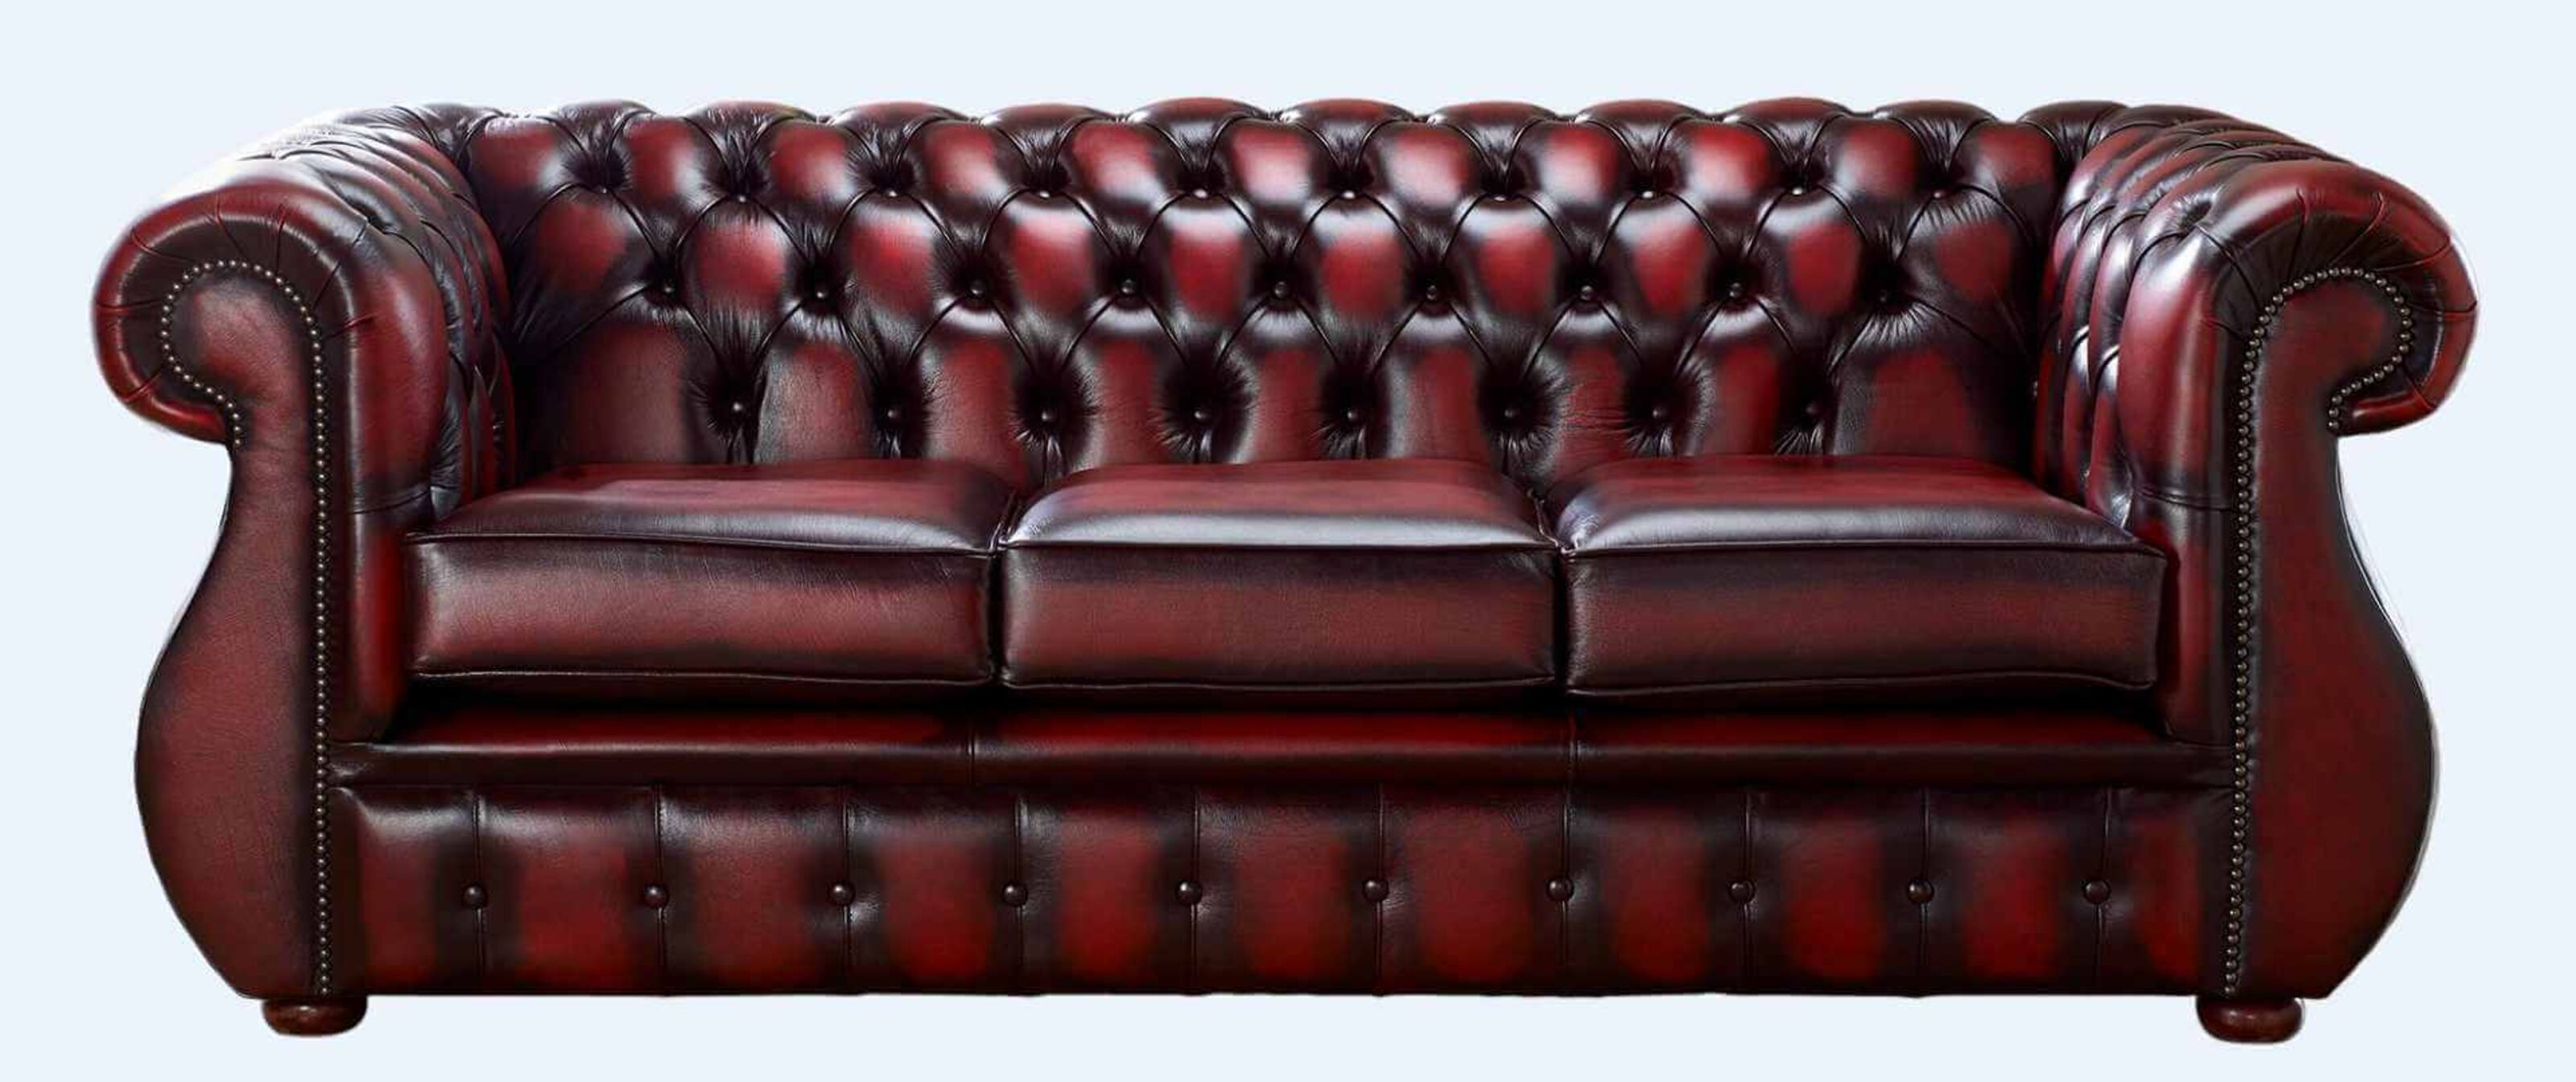 Elegant Comfort Chesterfield Sofas at Ethan Allen  %Post Title